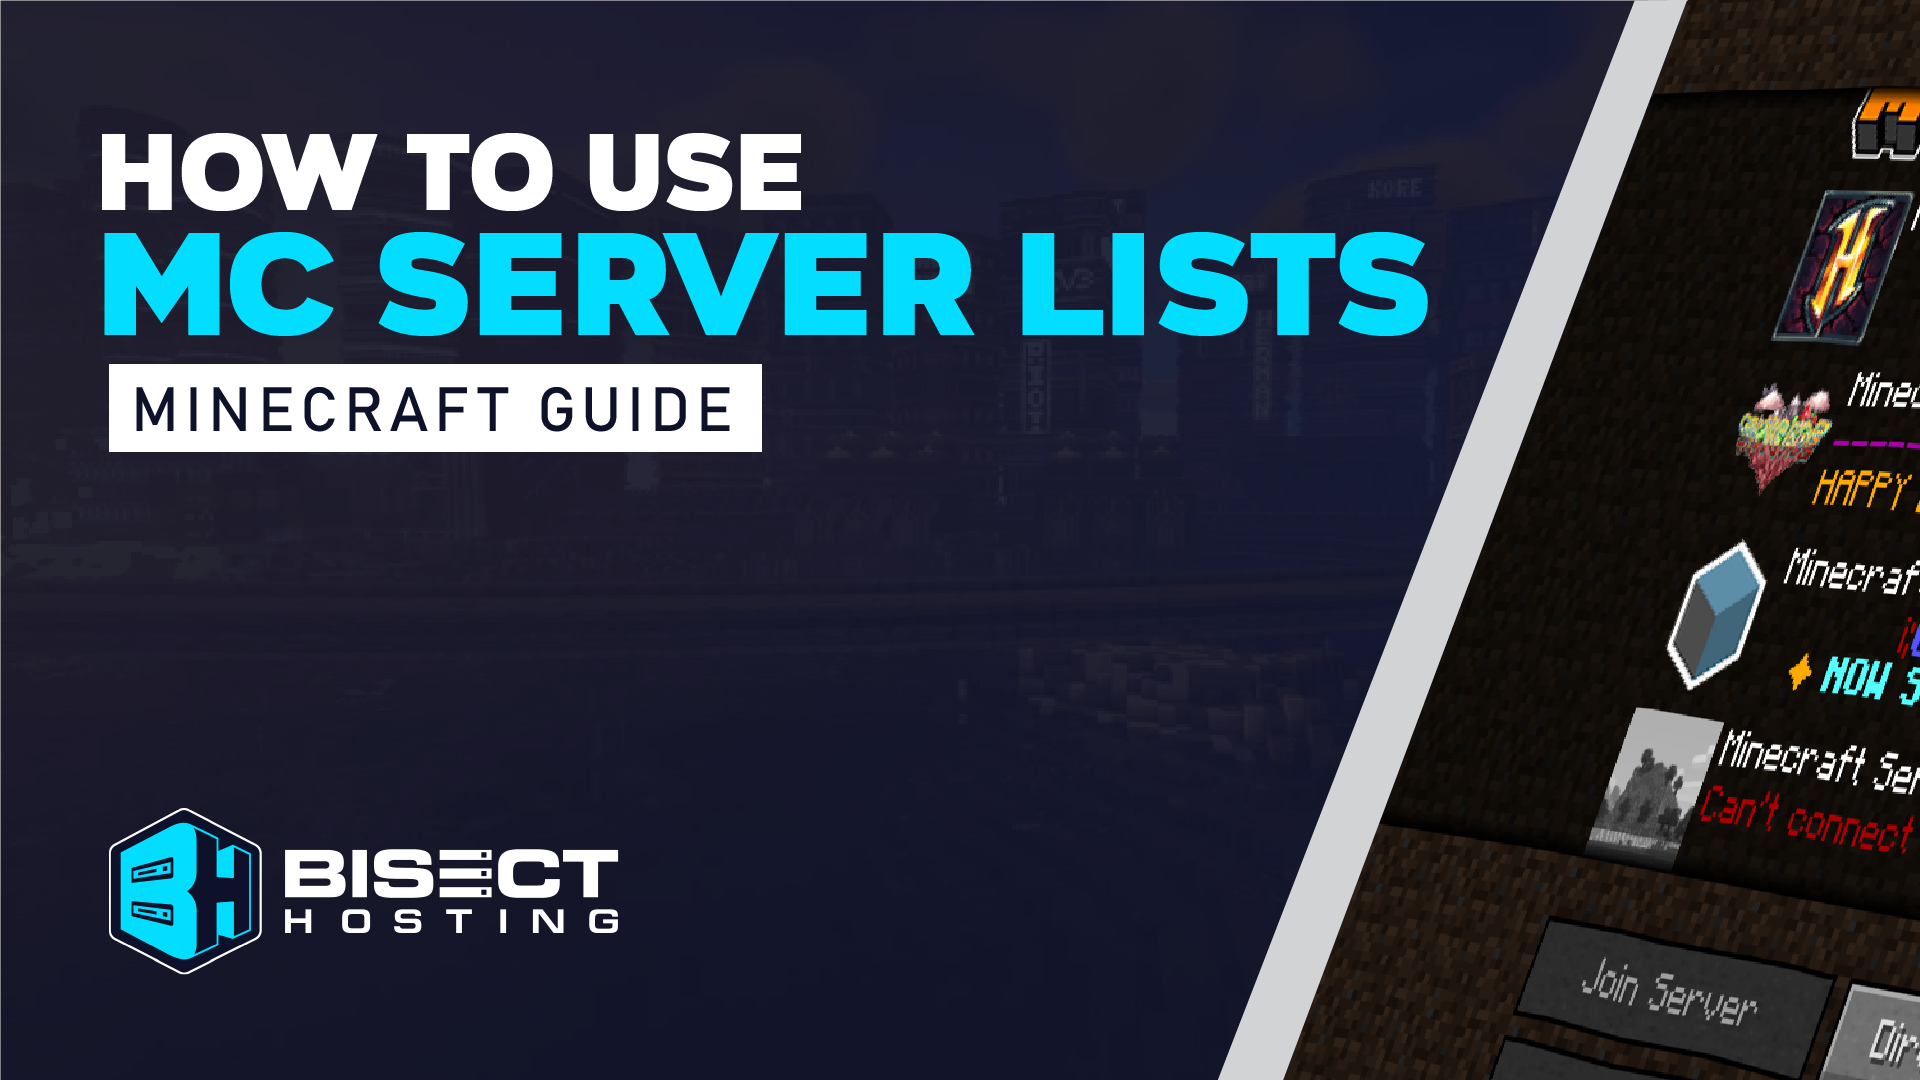 How to Use Minecraft Server Lists